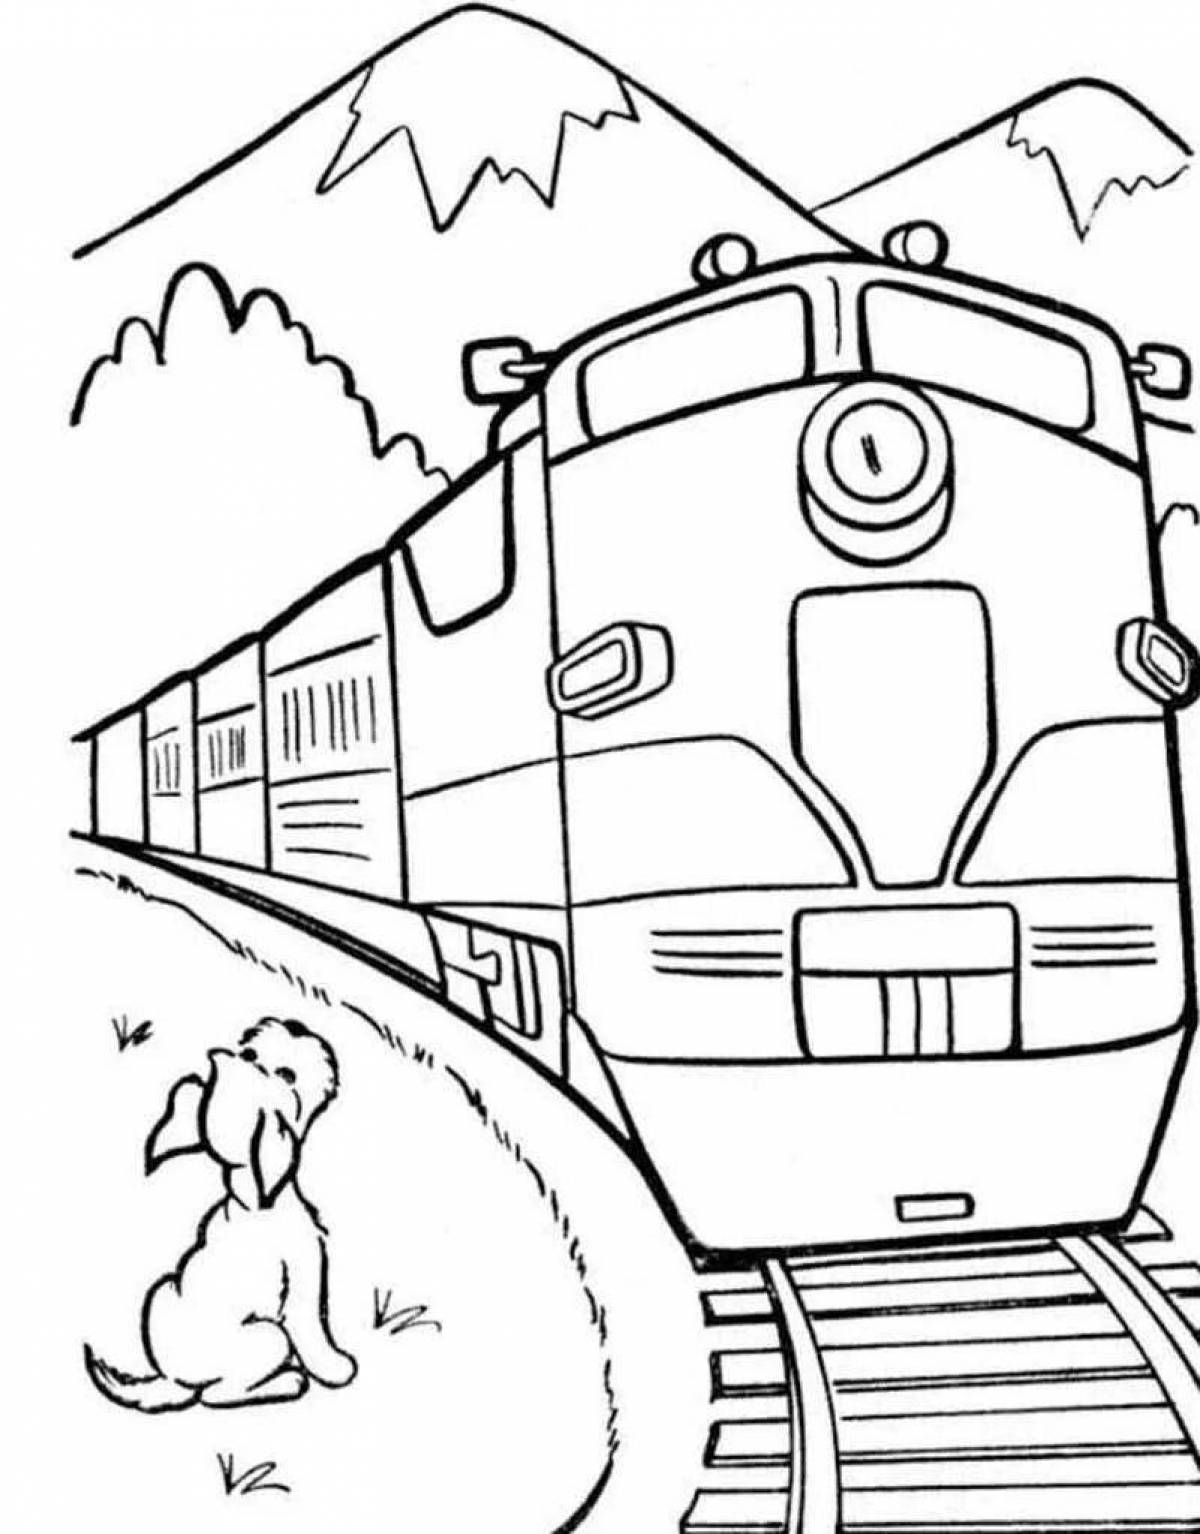 Exciting railroad safety coloring page